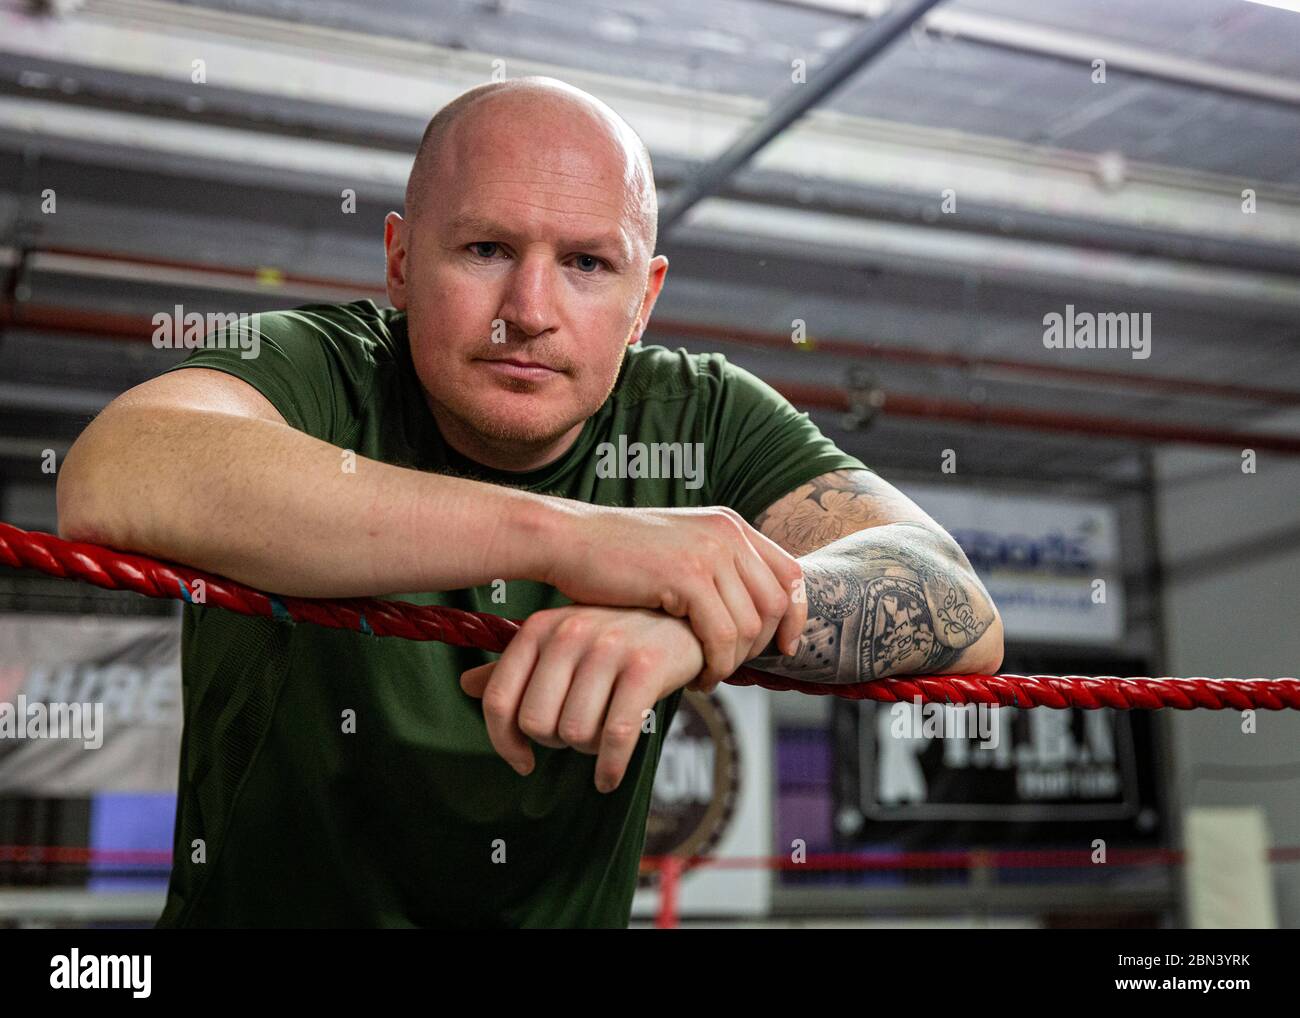 Stockport, UK. 03 May 2018. Matthew 'Magic' Hatton. The former professional boxer once held the European welterweight title and challenged for the WBC light-middleweight title. Now he runs the Magic Hatton gym/physical fitness centre. Photo by Matthew Lofthouse - Freelance Photographer Stock Photo